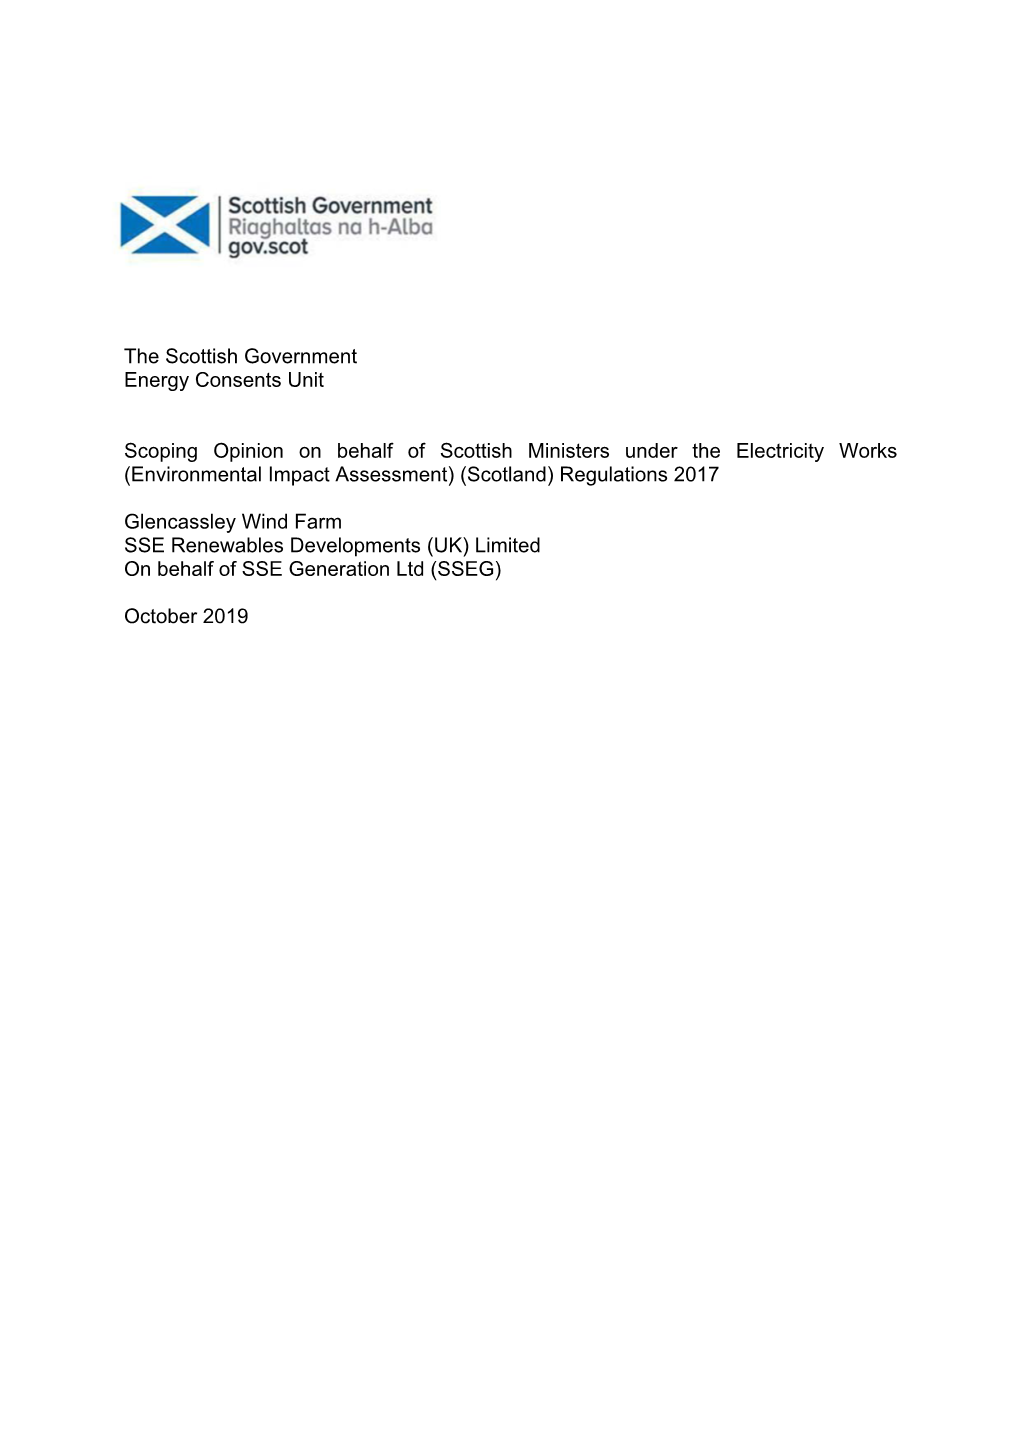 The Scottish Government Energy Consents Unit